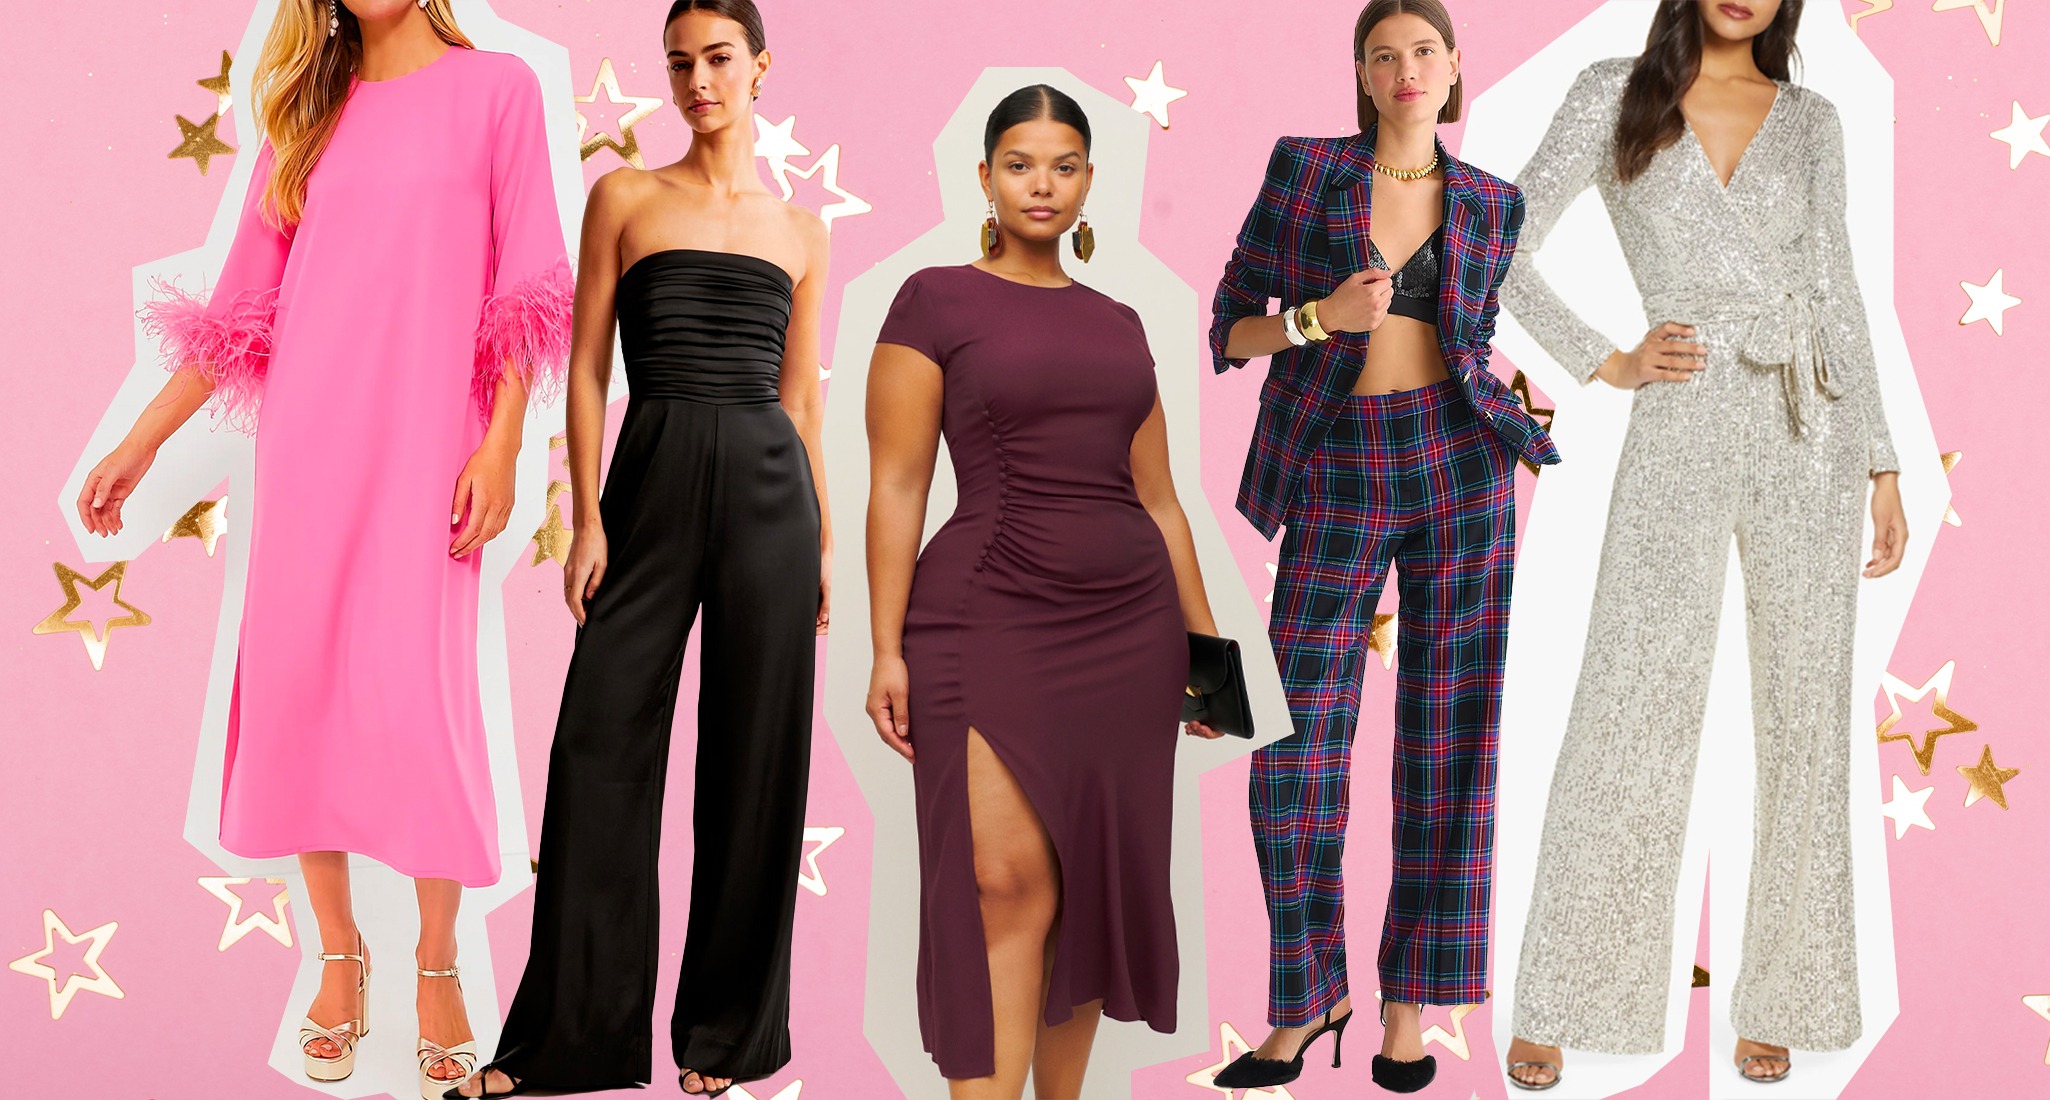 7 New Years Eve Outfit Ideas